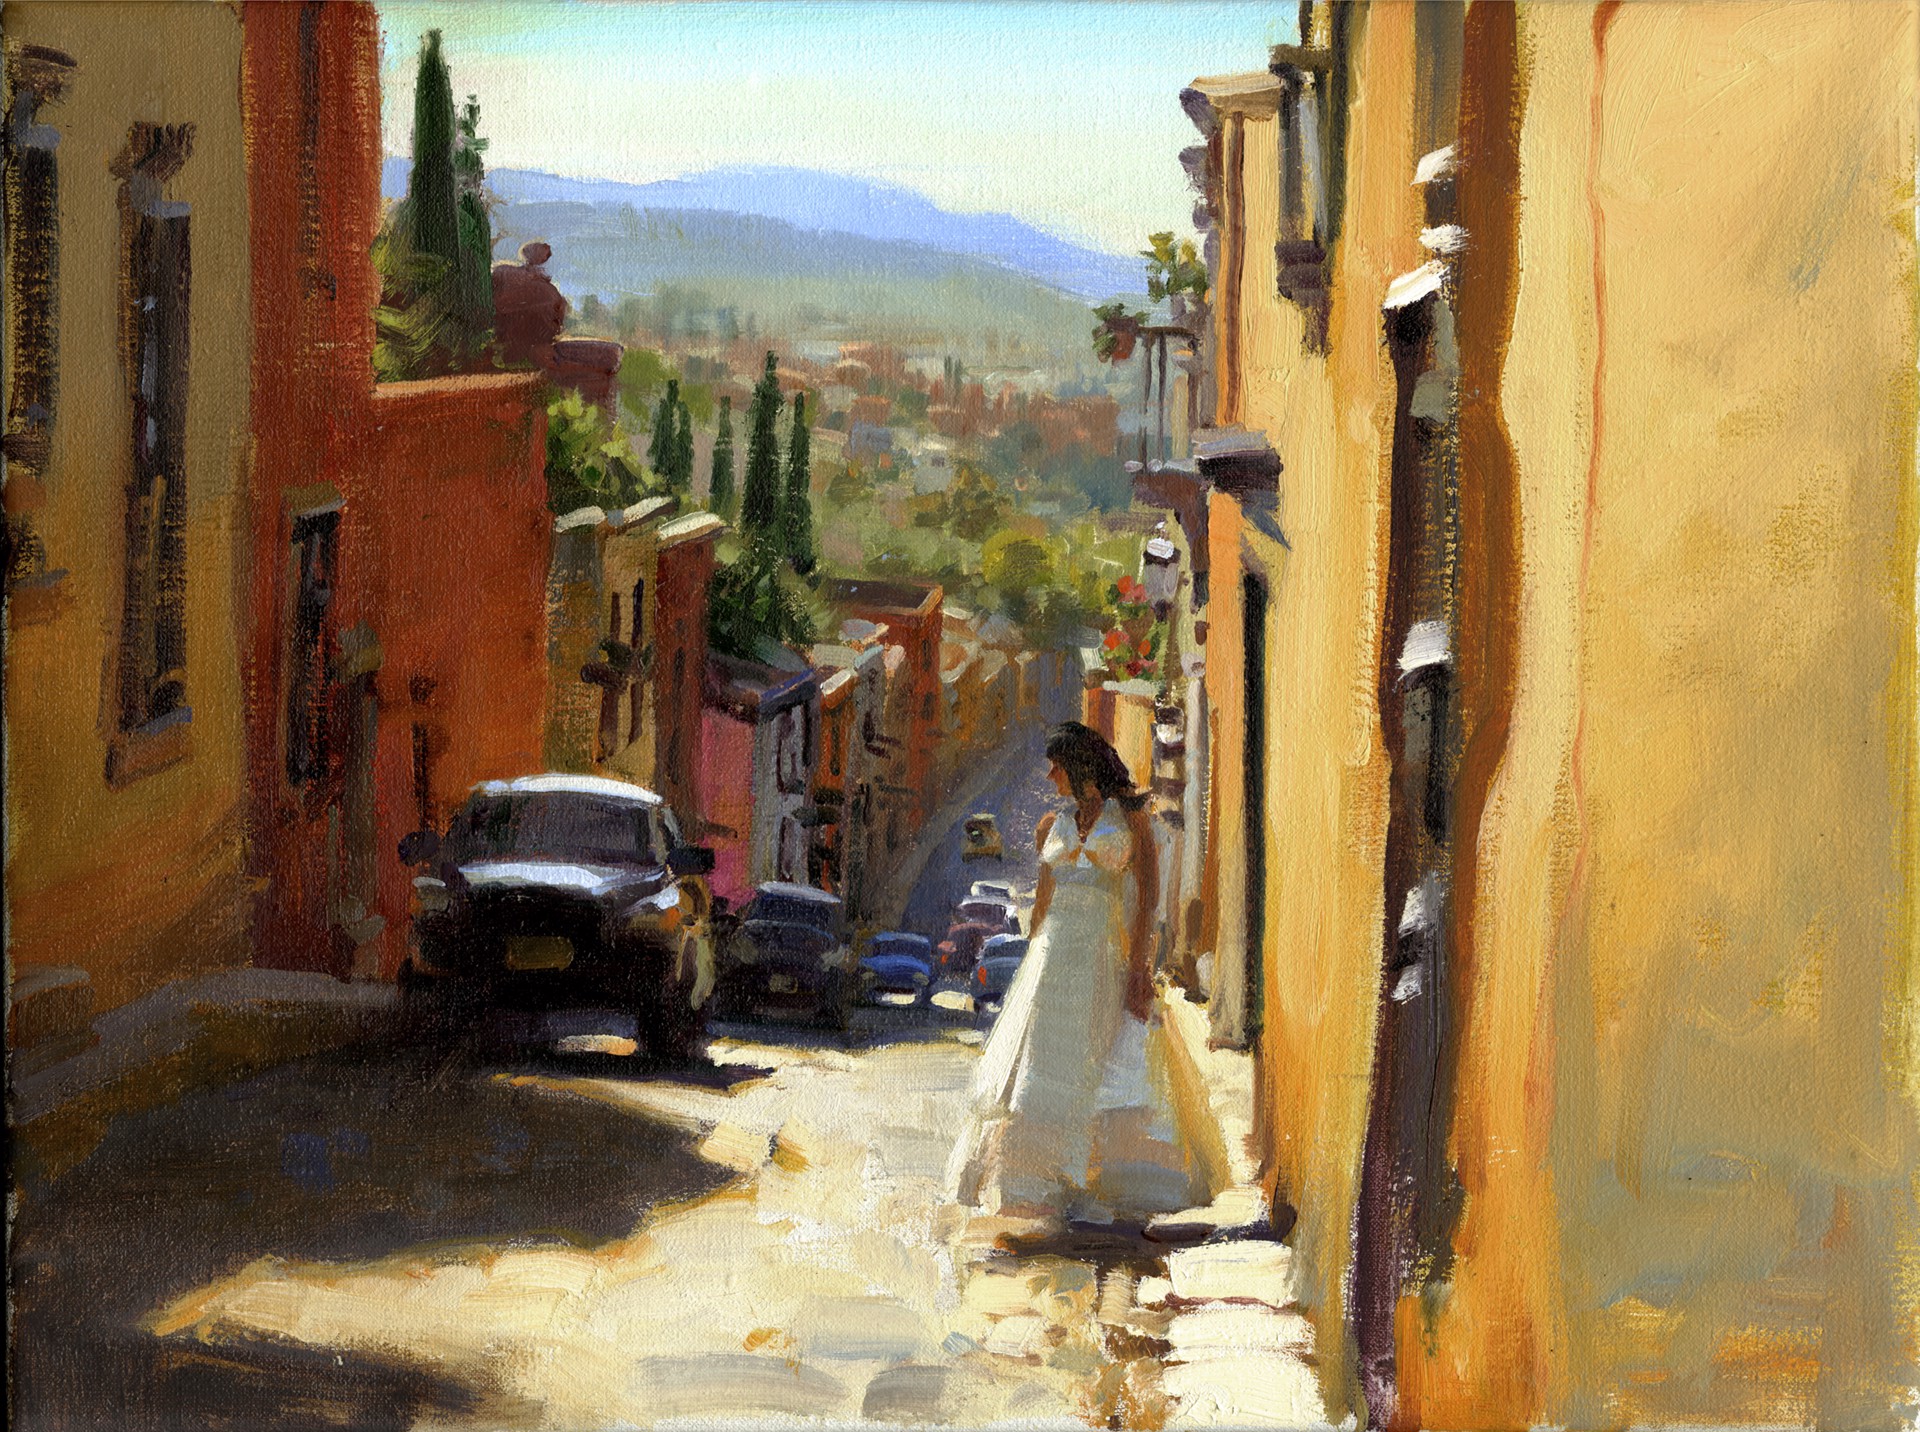 Hills of San Miguel by Kim English